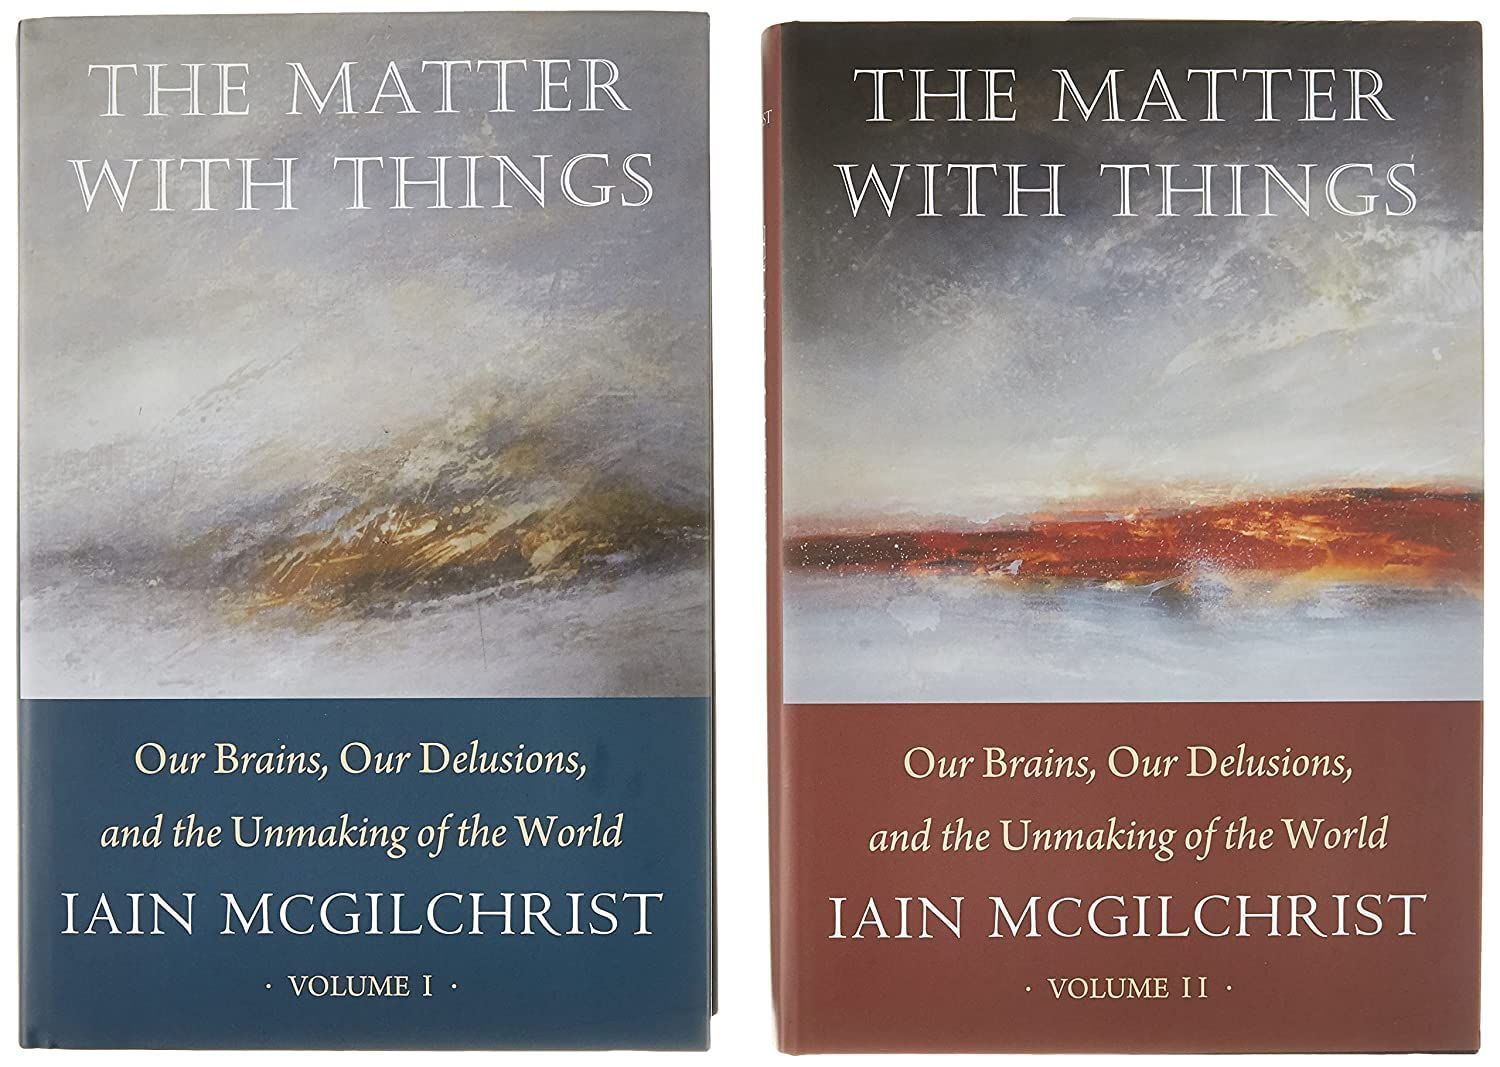 A Brain of Two Minds: On Iain McGilchrist’s “The Matter with Things”